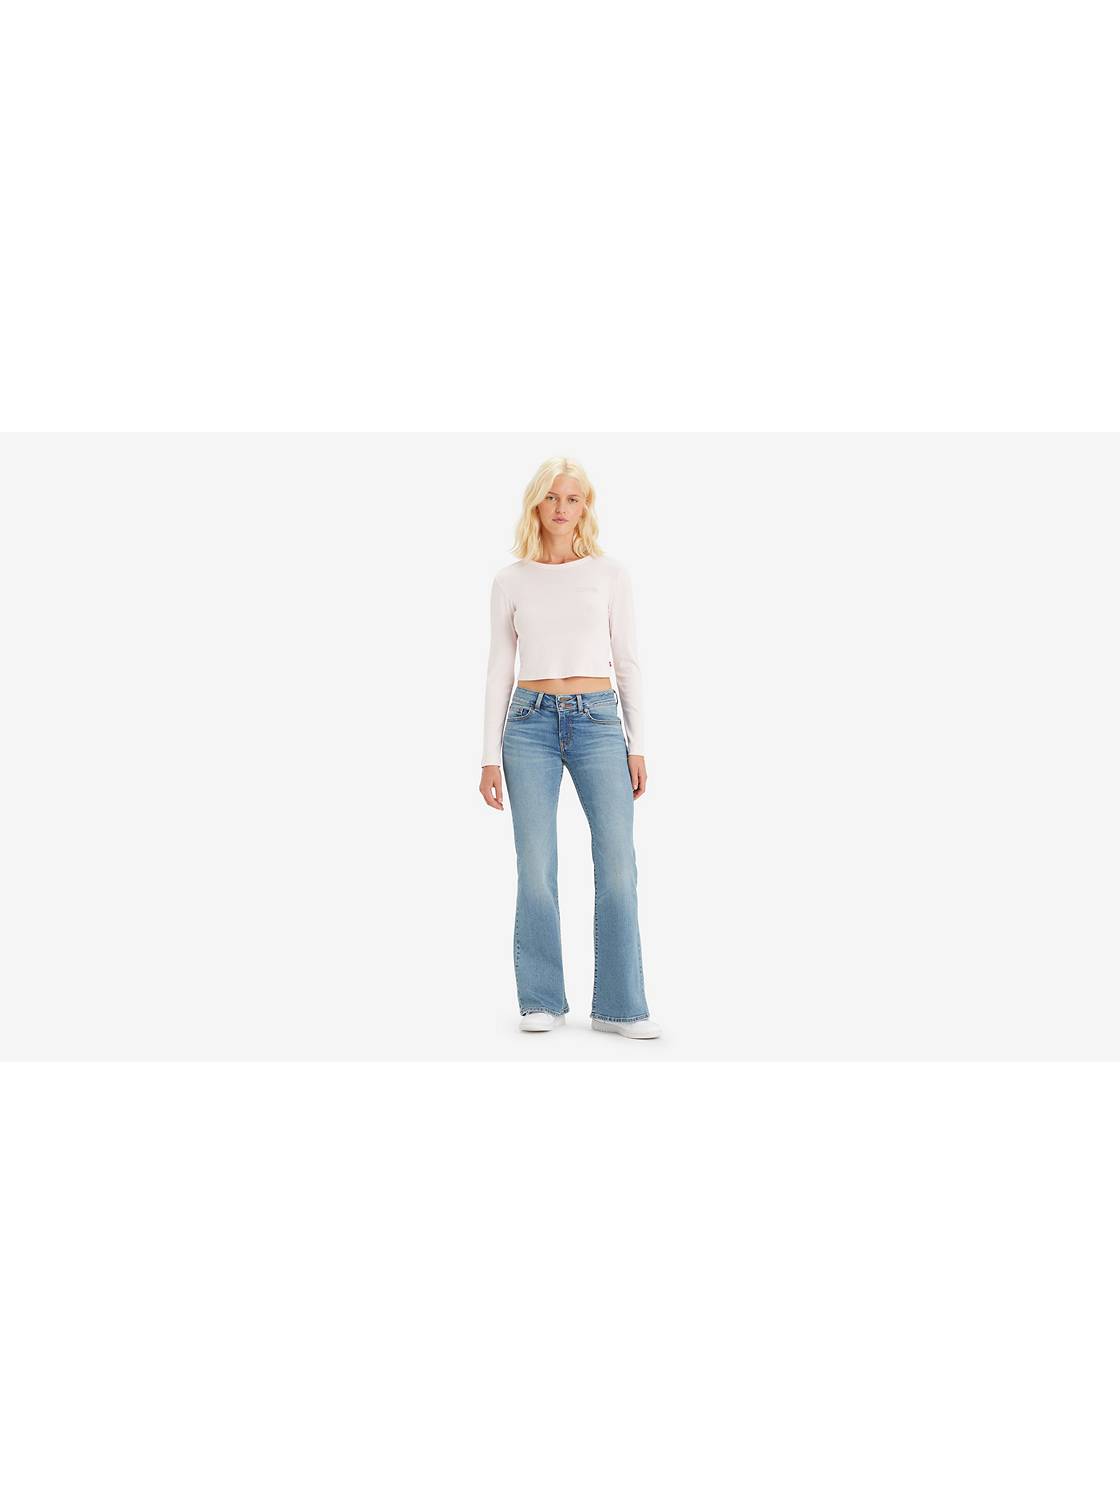 TALBOTS Flawless Five Pocket Jeans Flare Bootcut White Size 8 P at